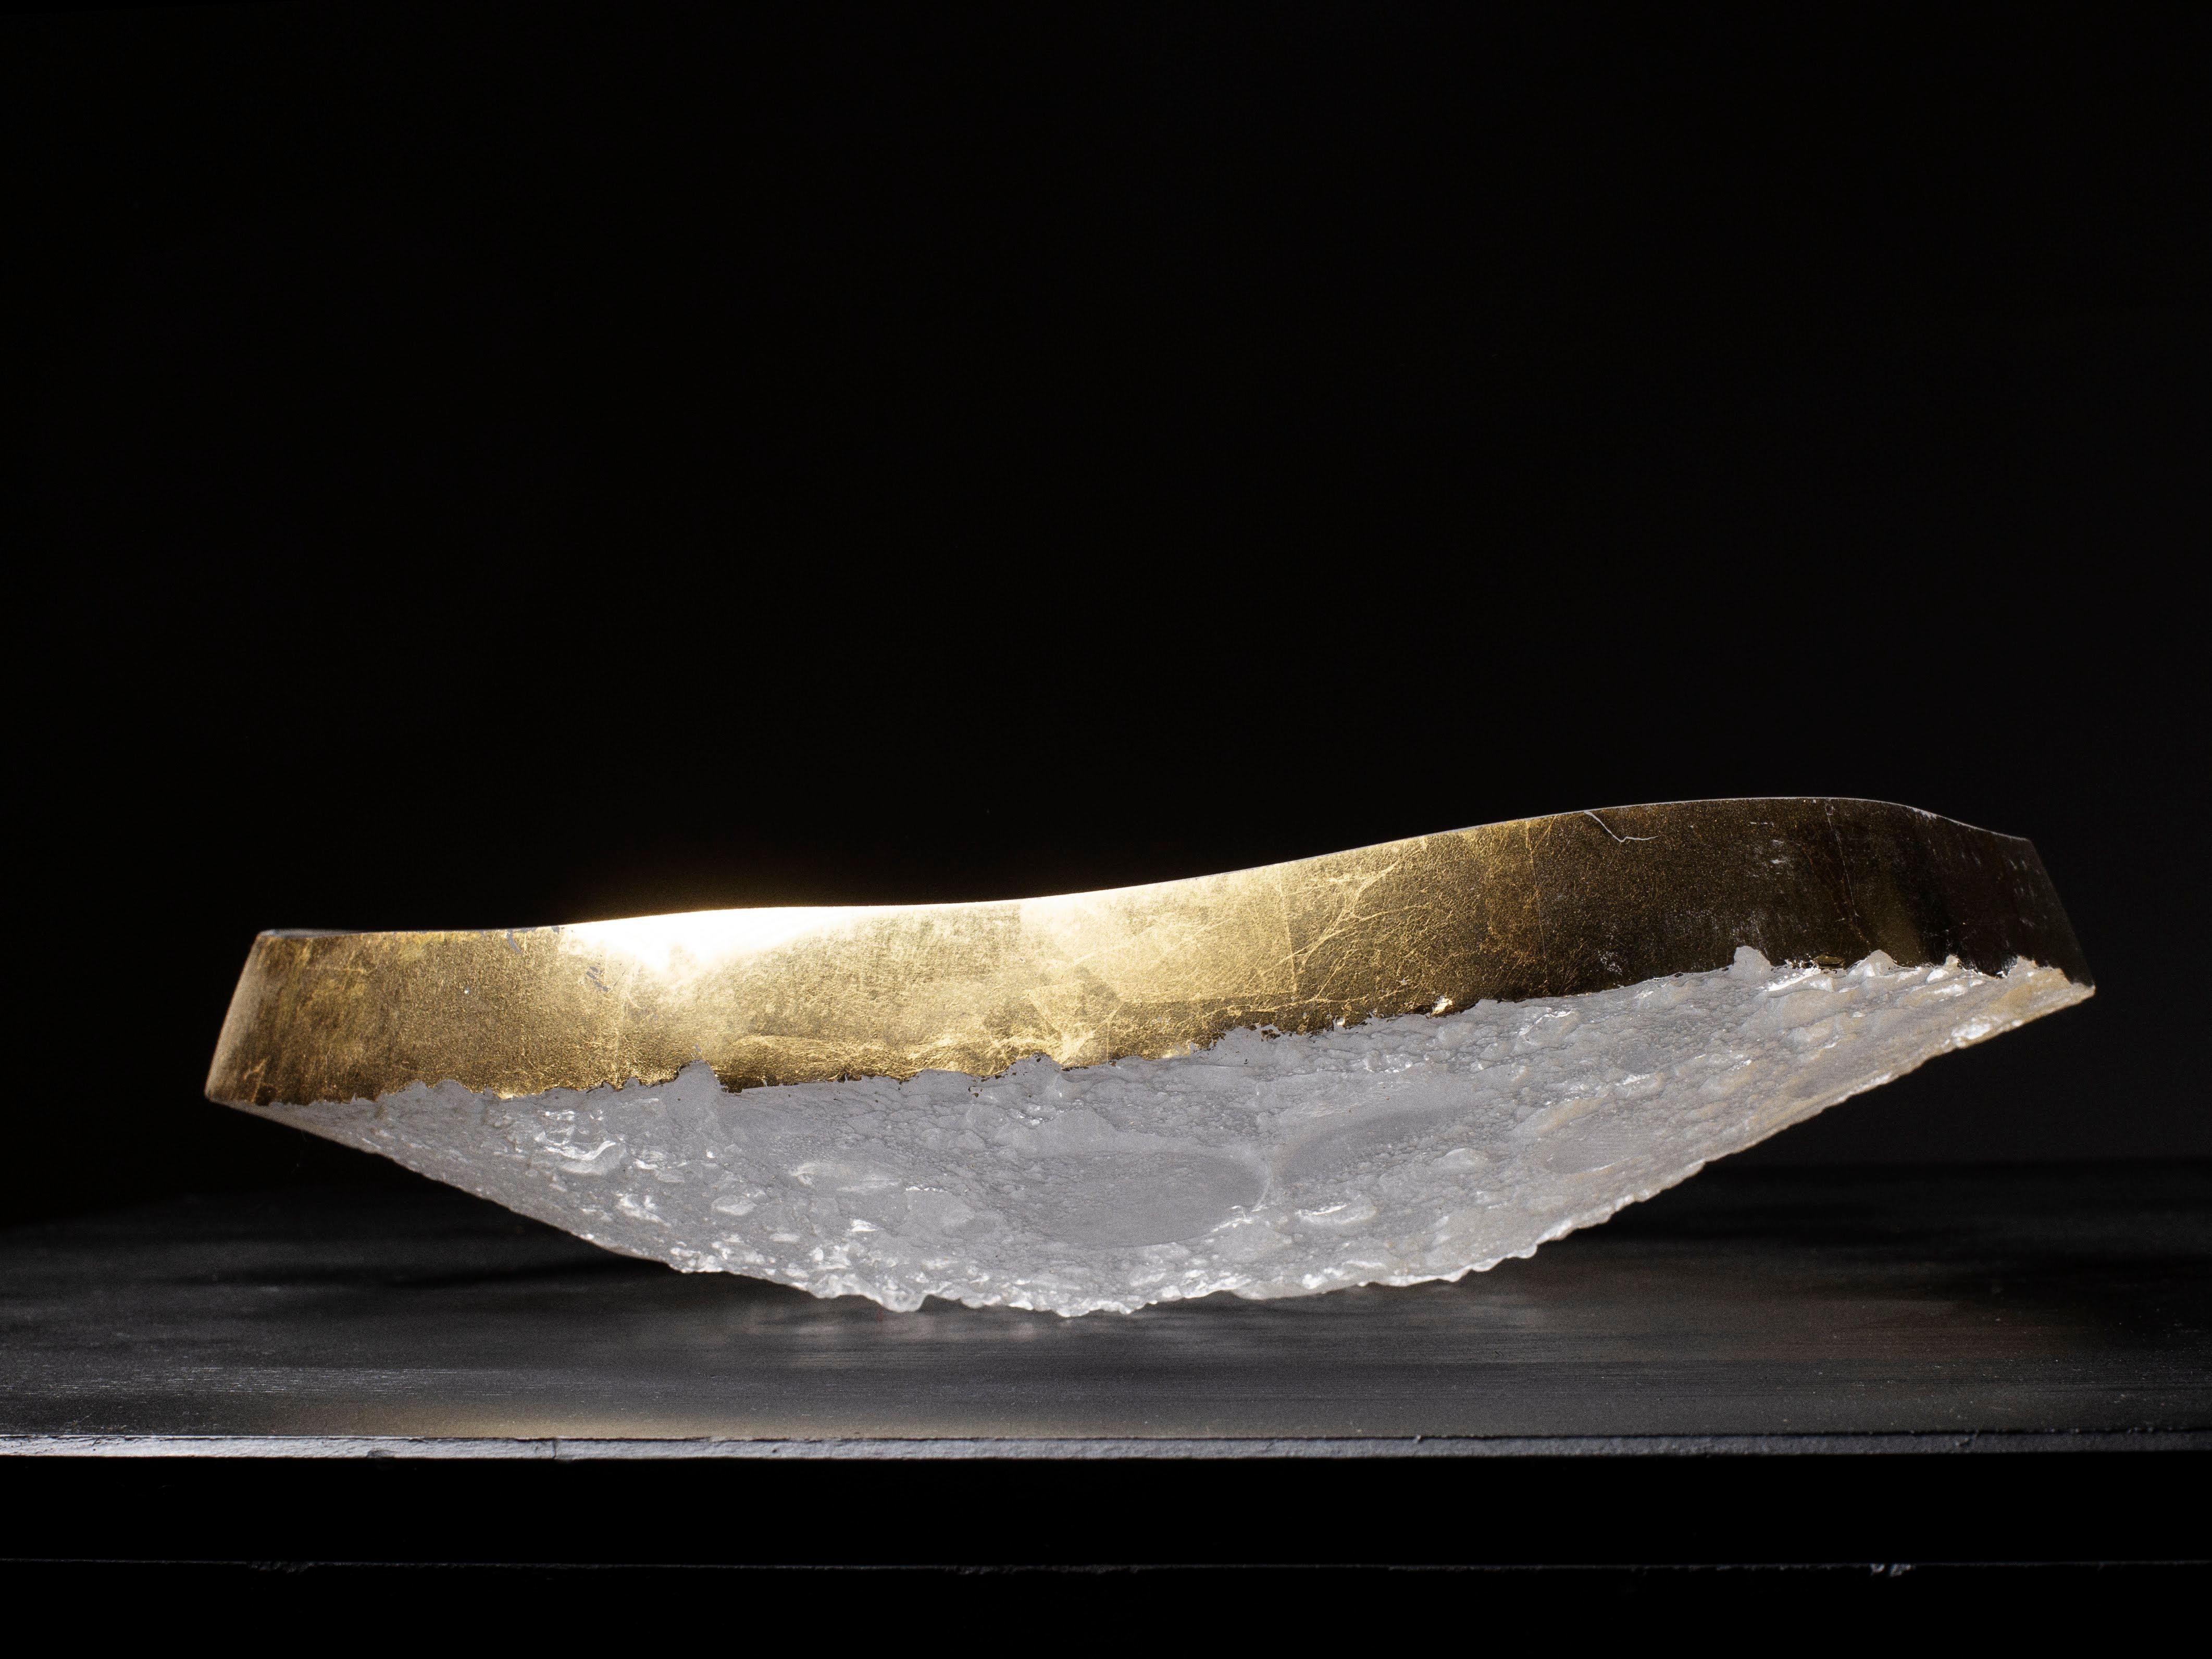 Géode Round Plate by Matthieu Gicquel
Dimensions: D 32 x W 36 x H 3 cm.
Materials: Optical glass and gold leaf.
Weight: 7 kg.

Each piece is numbered. Please contact us.

Praise for the moment
Light shines through the glass. Details are revealed one